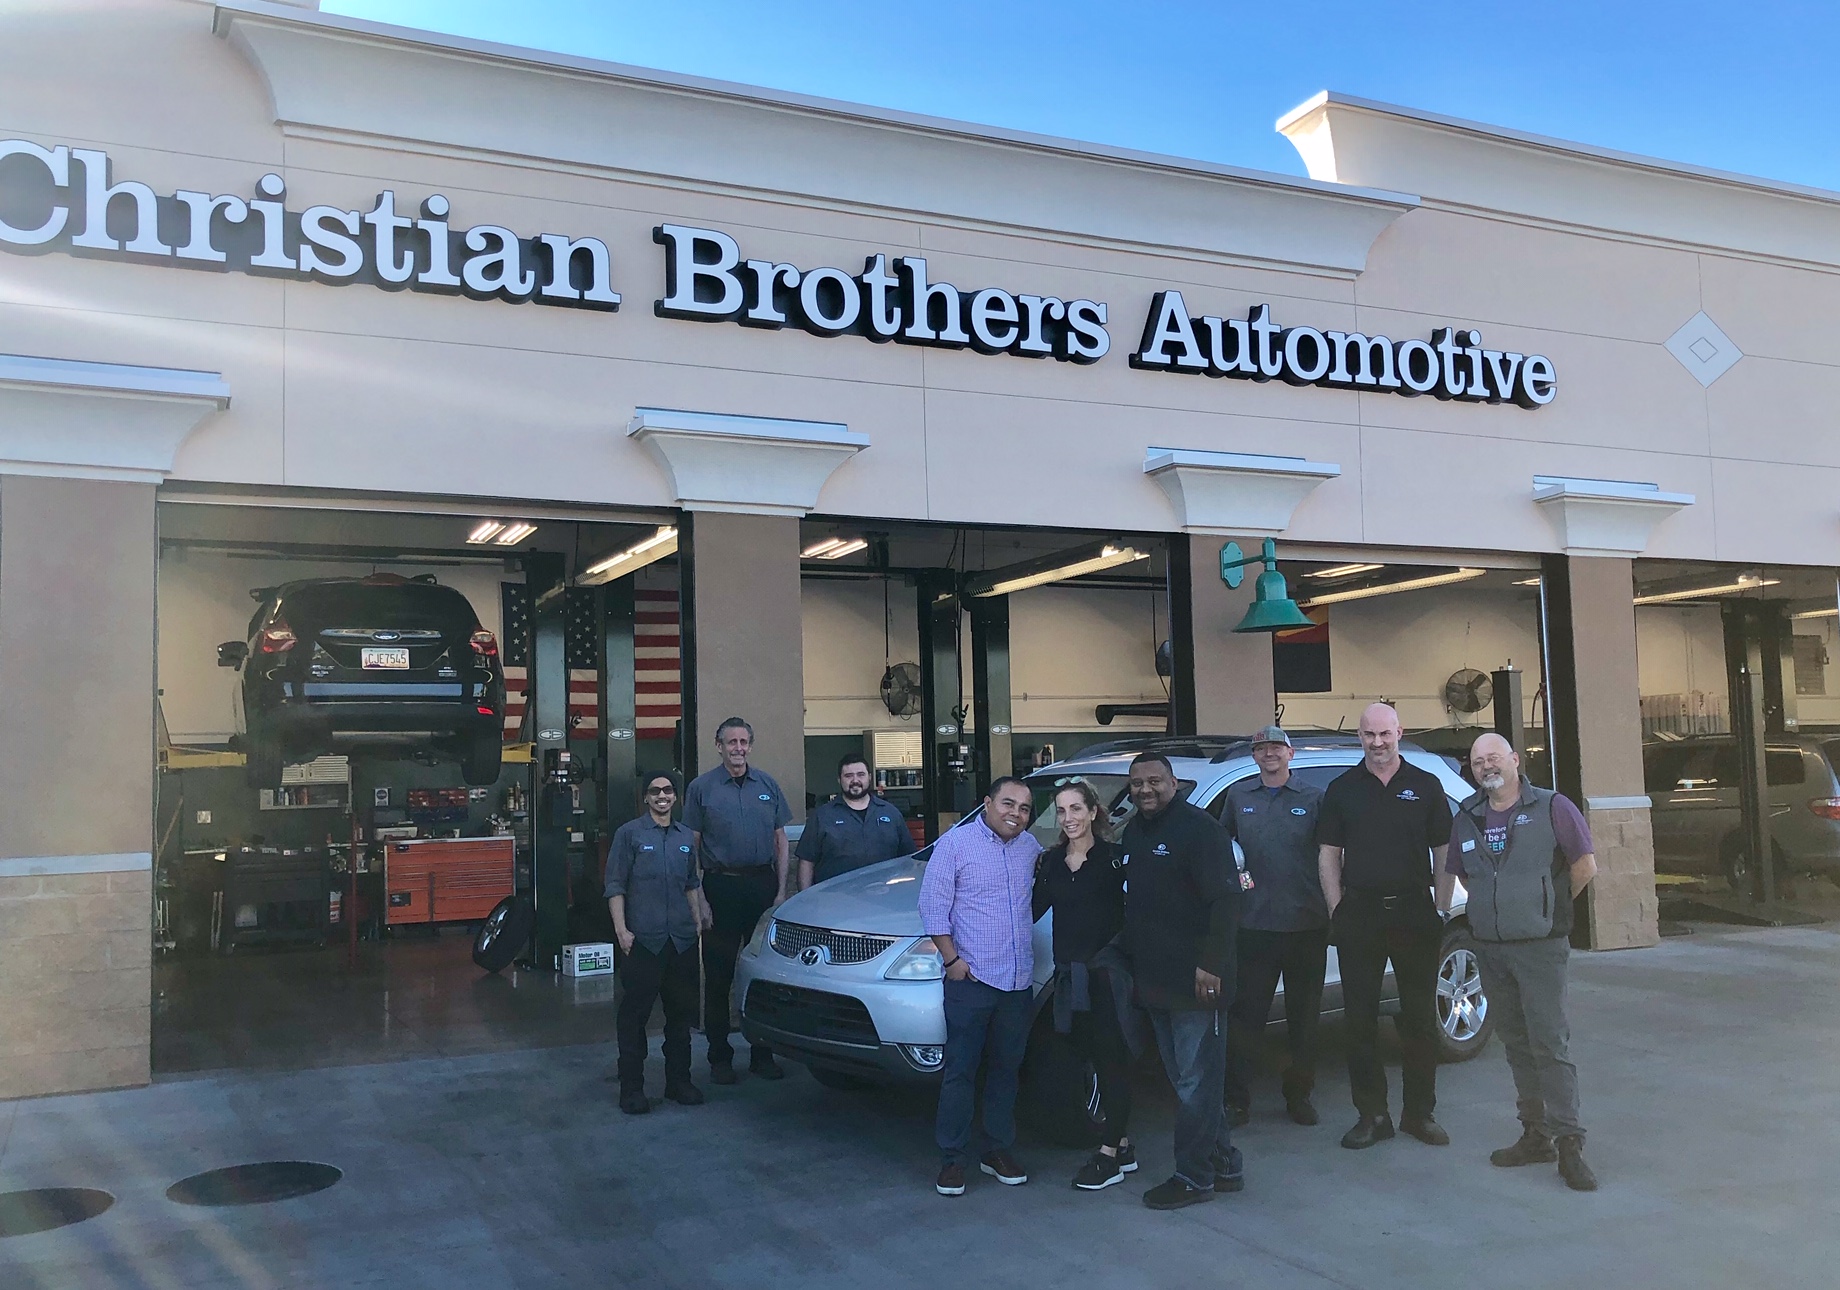 people in front of car in front of christian brothers automotive shop